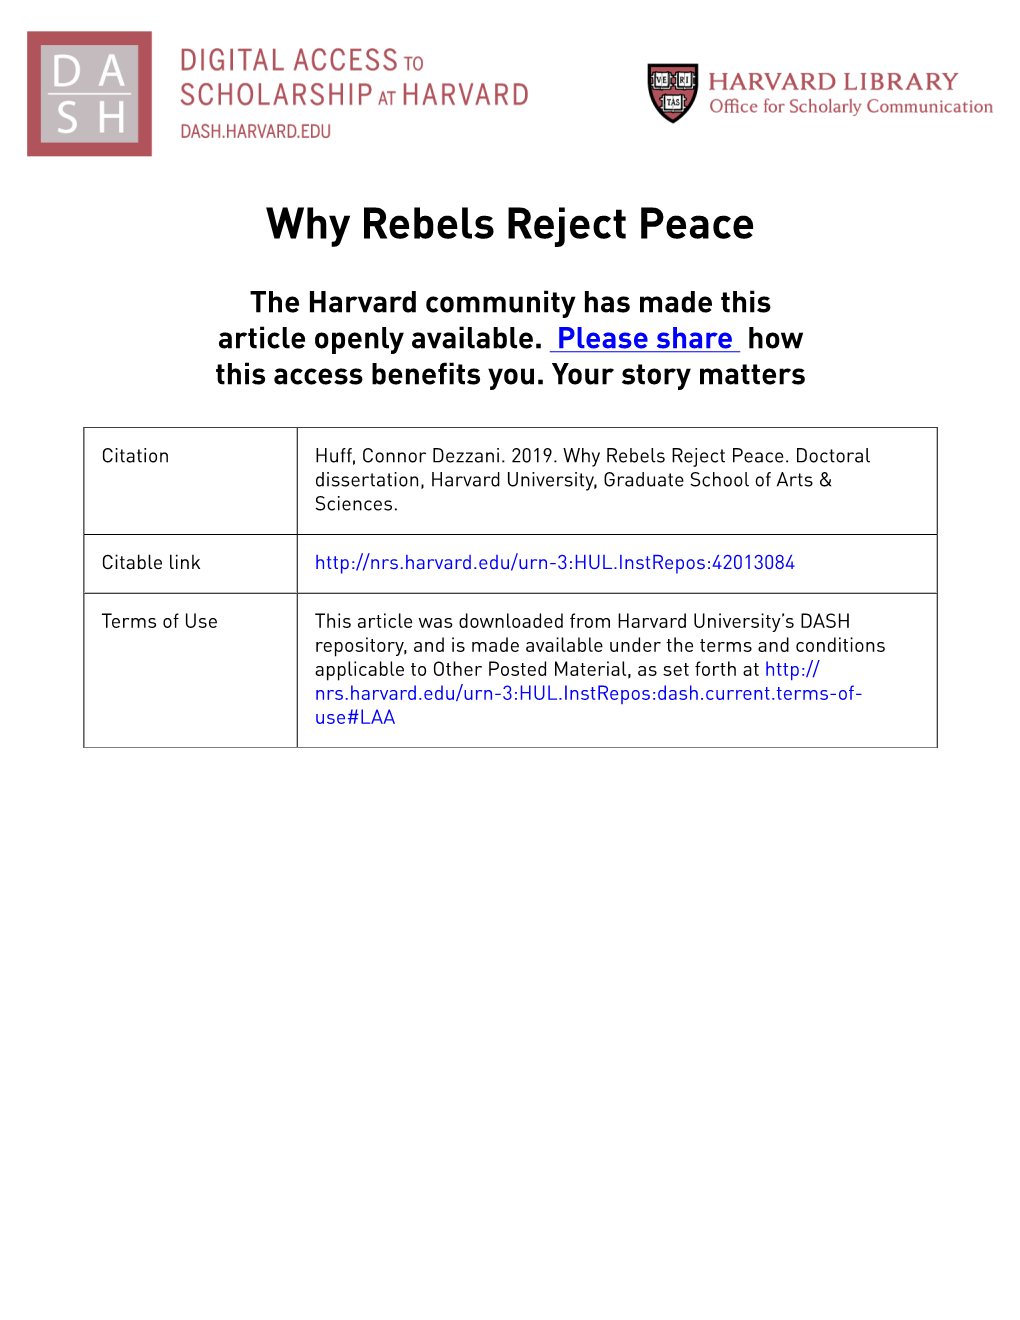 Why Rebels Reject Peace